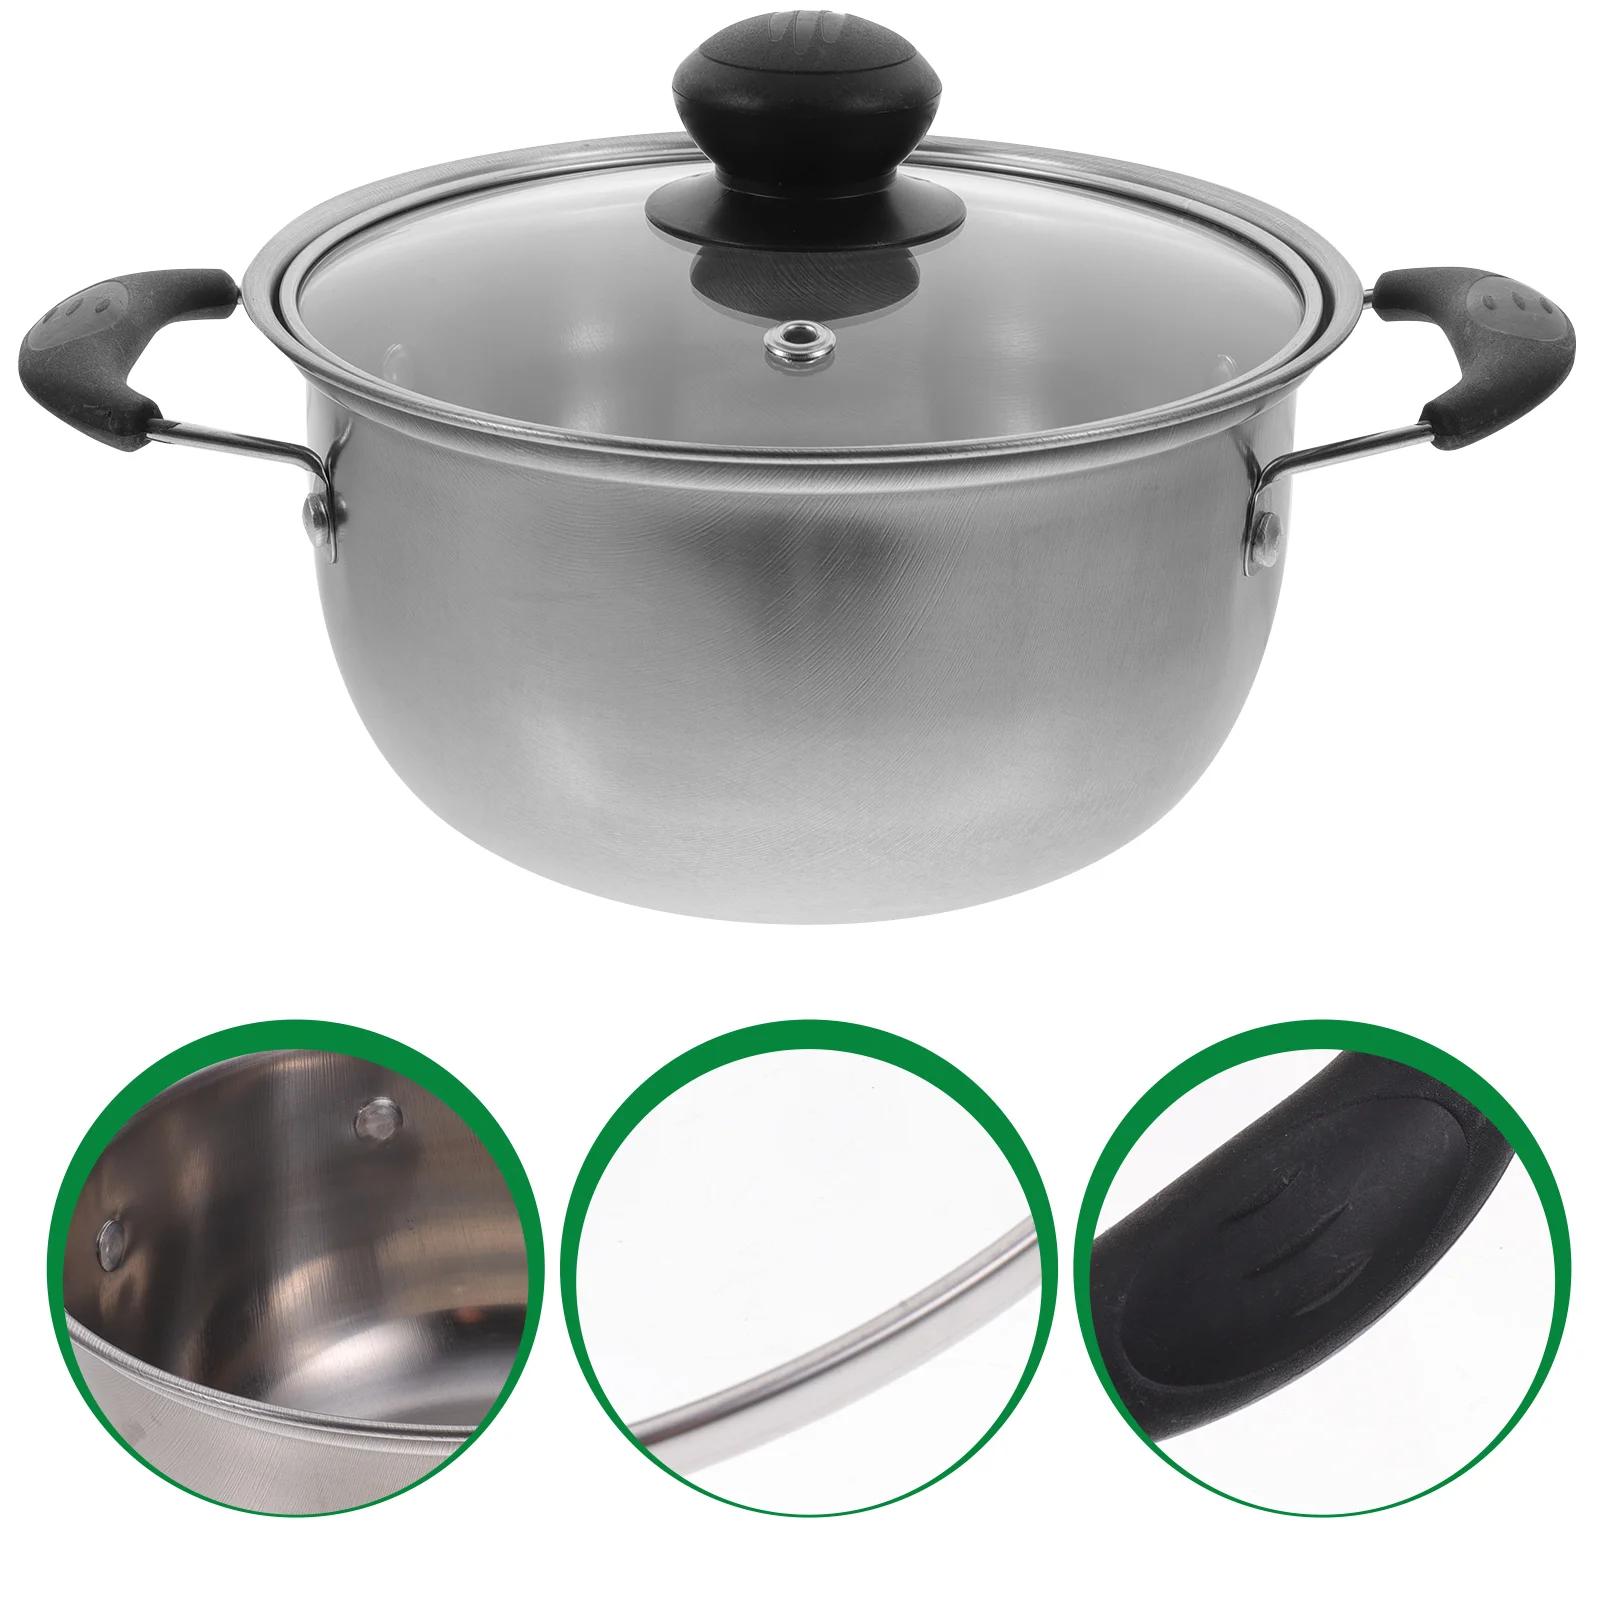 

Stainless Steel Milk Pot Healthy Cookware Induction Frying Pan Heating Kitchen Practical Baby Nonstick Pots for cooking